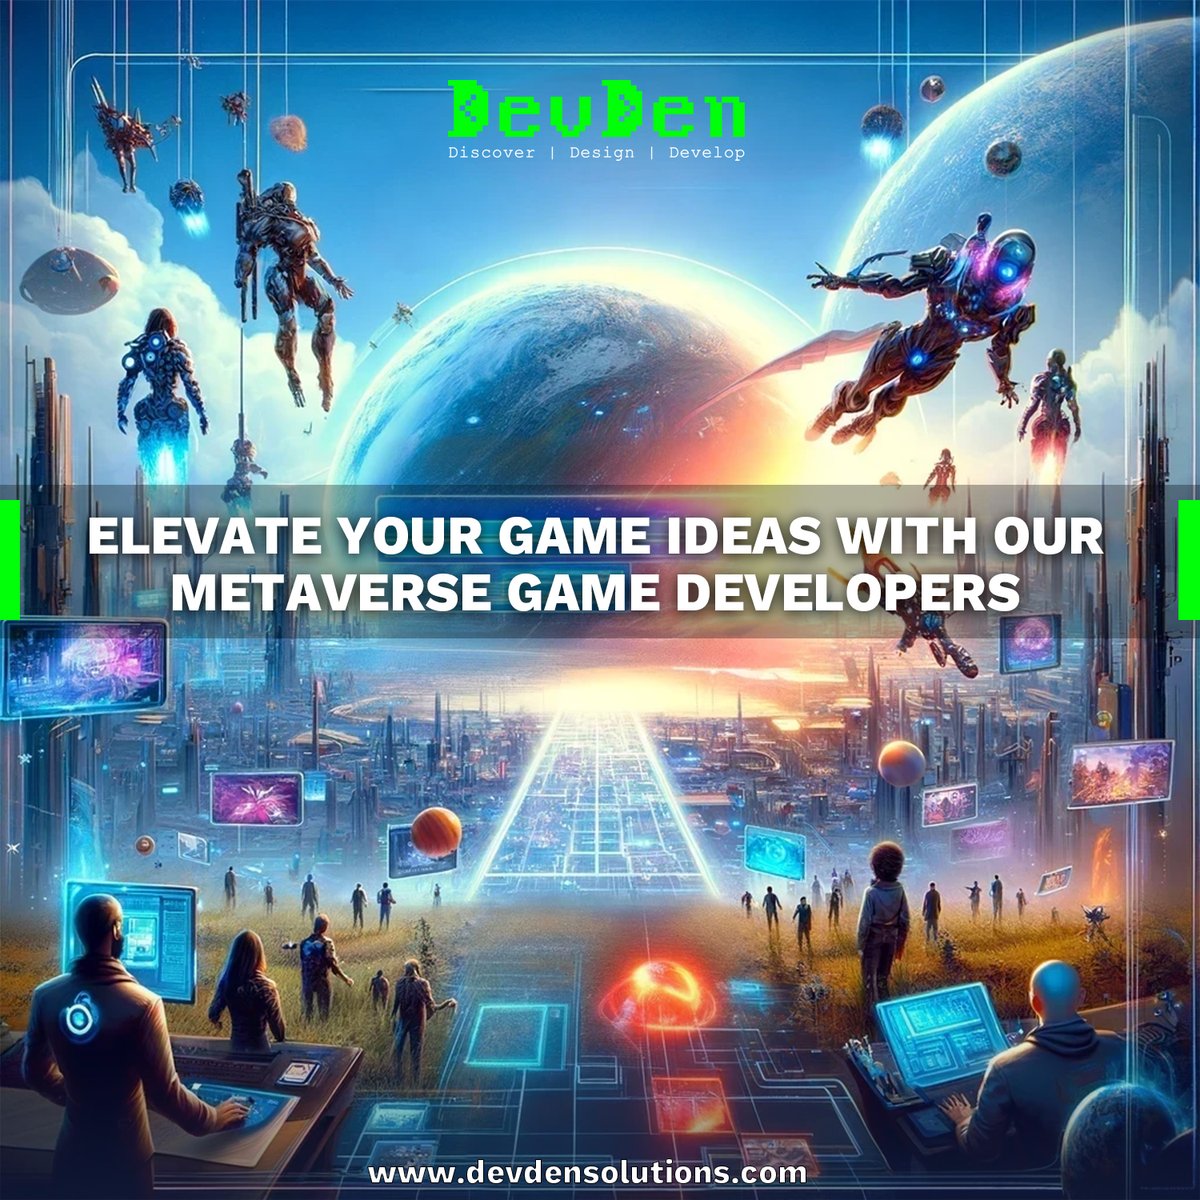 Dive into the future of game development with #DevDen metaverse solutions!

#Gamedevelopment #Metaverse #Metaversegaming #immersivegaming #VRgaming #virtualreality #augmentedreality #vrgamedevelopment #metaversegamedevelopment #VRsolutions #MR #XRsolutions #DevDenCreatives